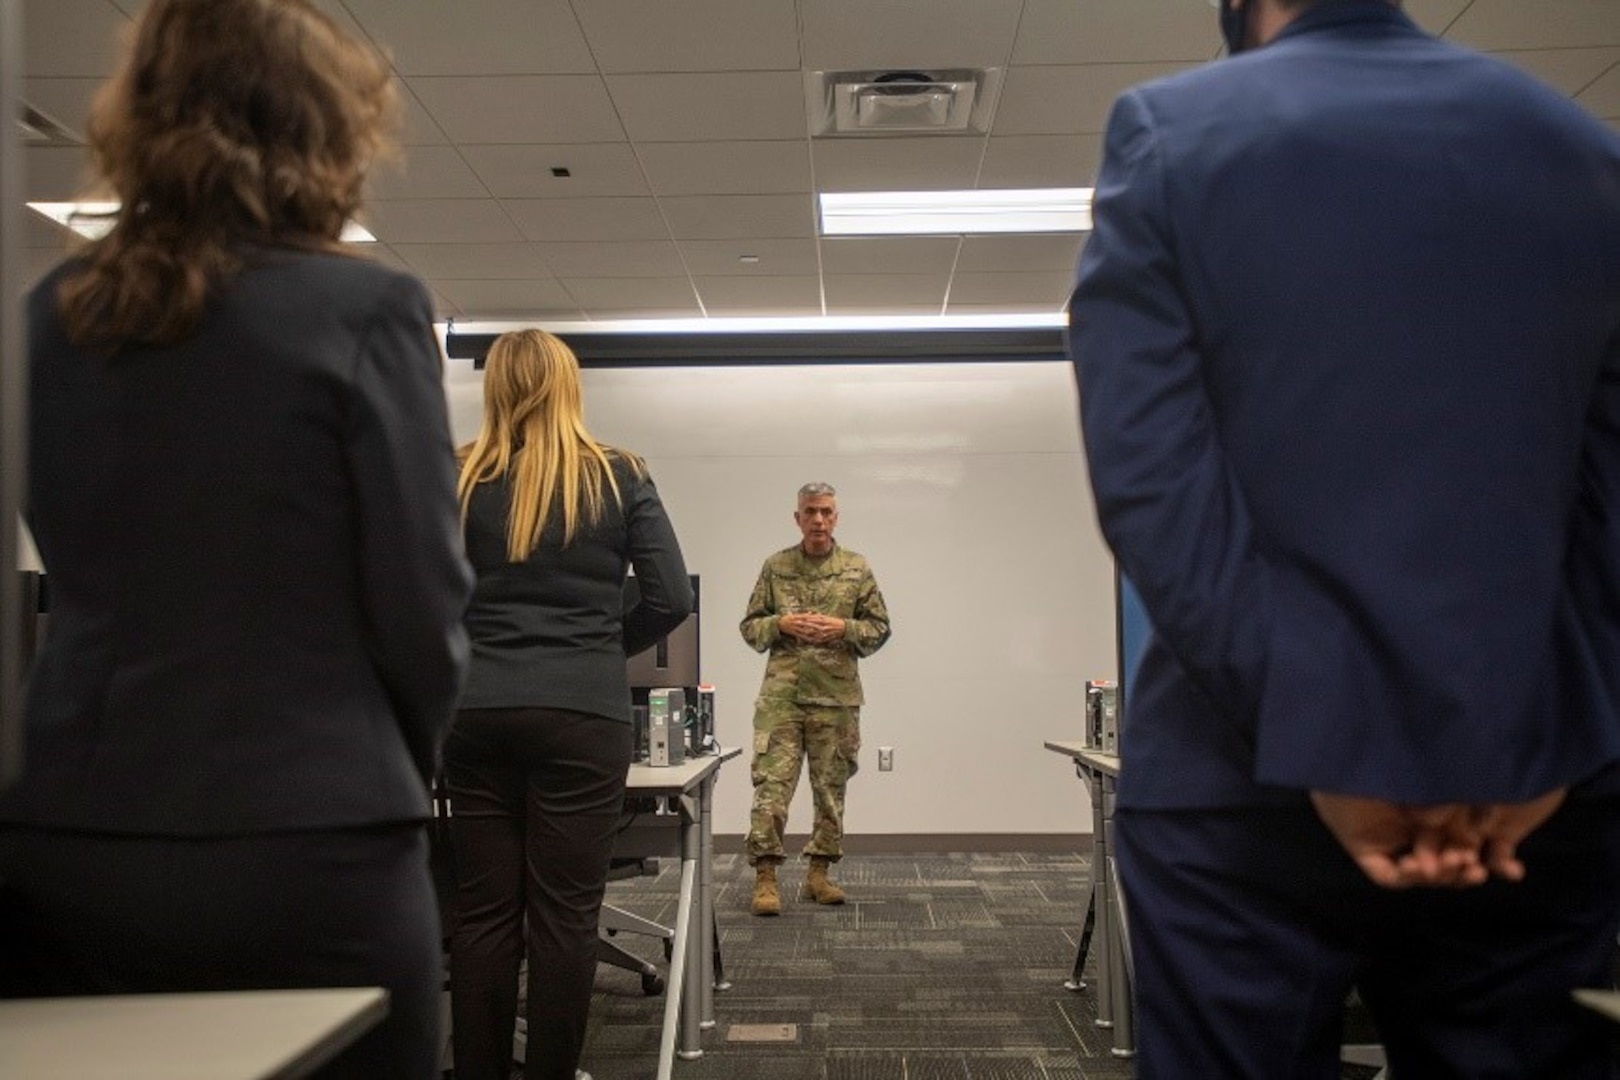 Paul M. Nakasone, General, U.S. Army; Commander, U.S. Cyber Command; Director, National Security Agency; Chief, Central Security Service, addresses college interns from NSA’s Director’s Summer Program (DSP) and Graduate Mathematics Program (GMP).